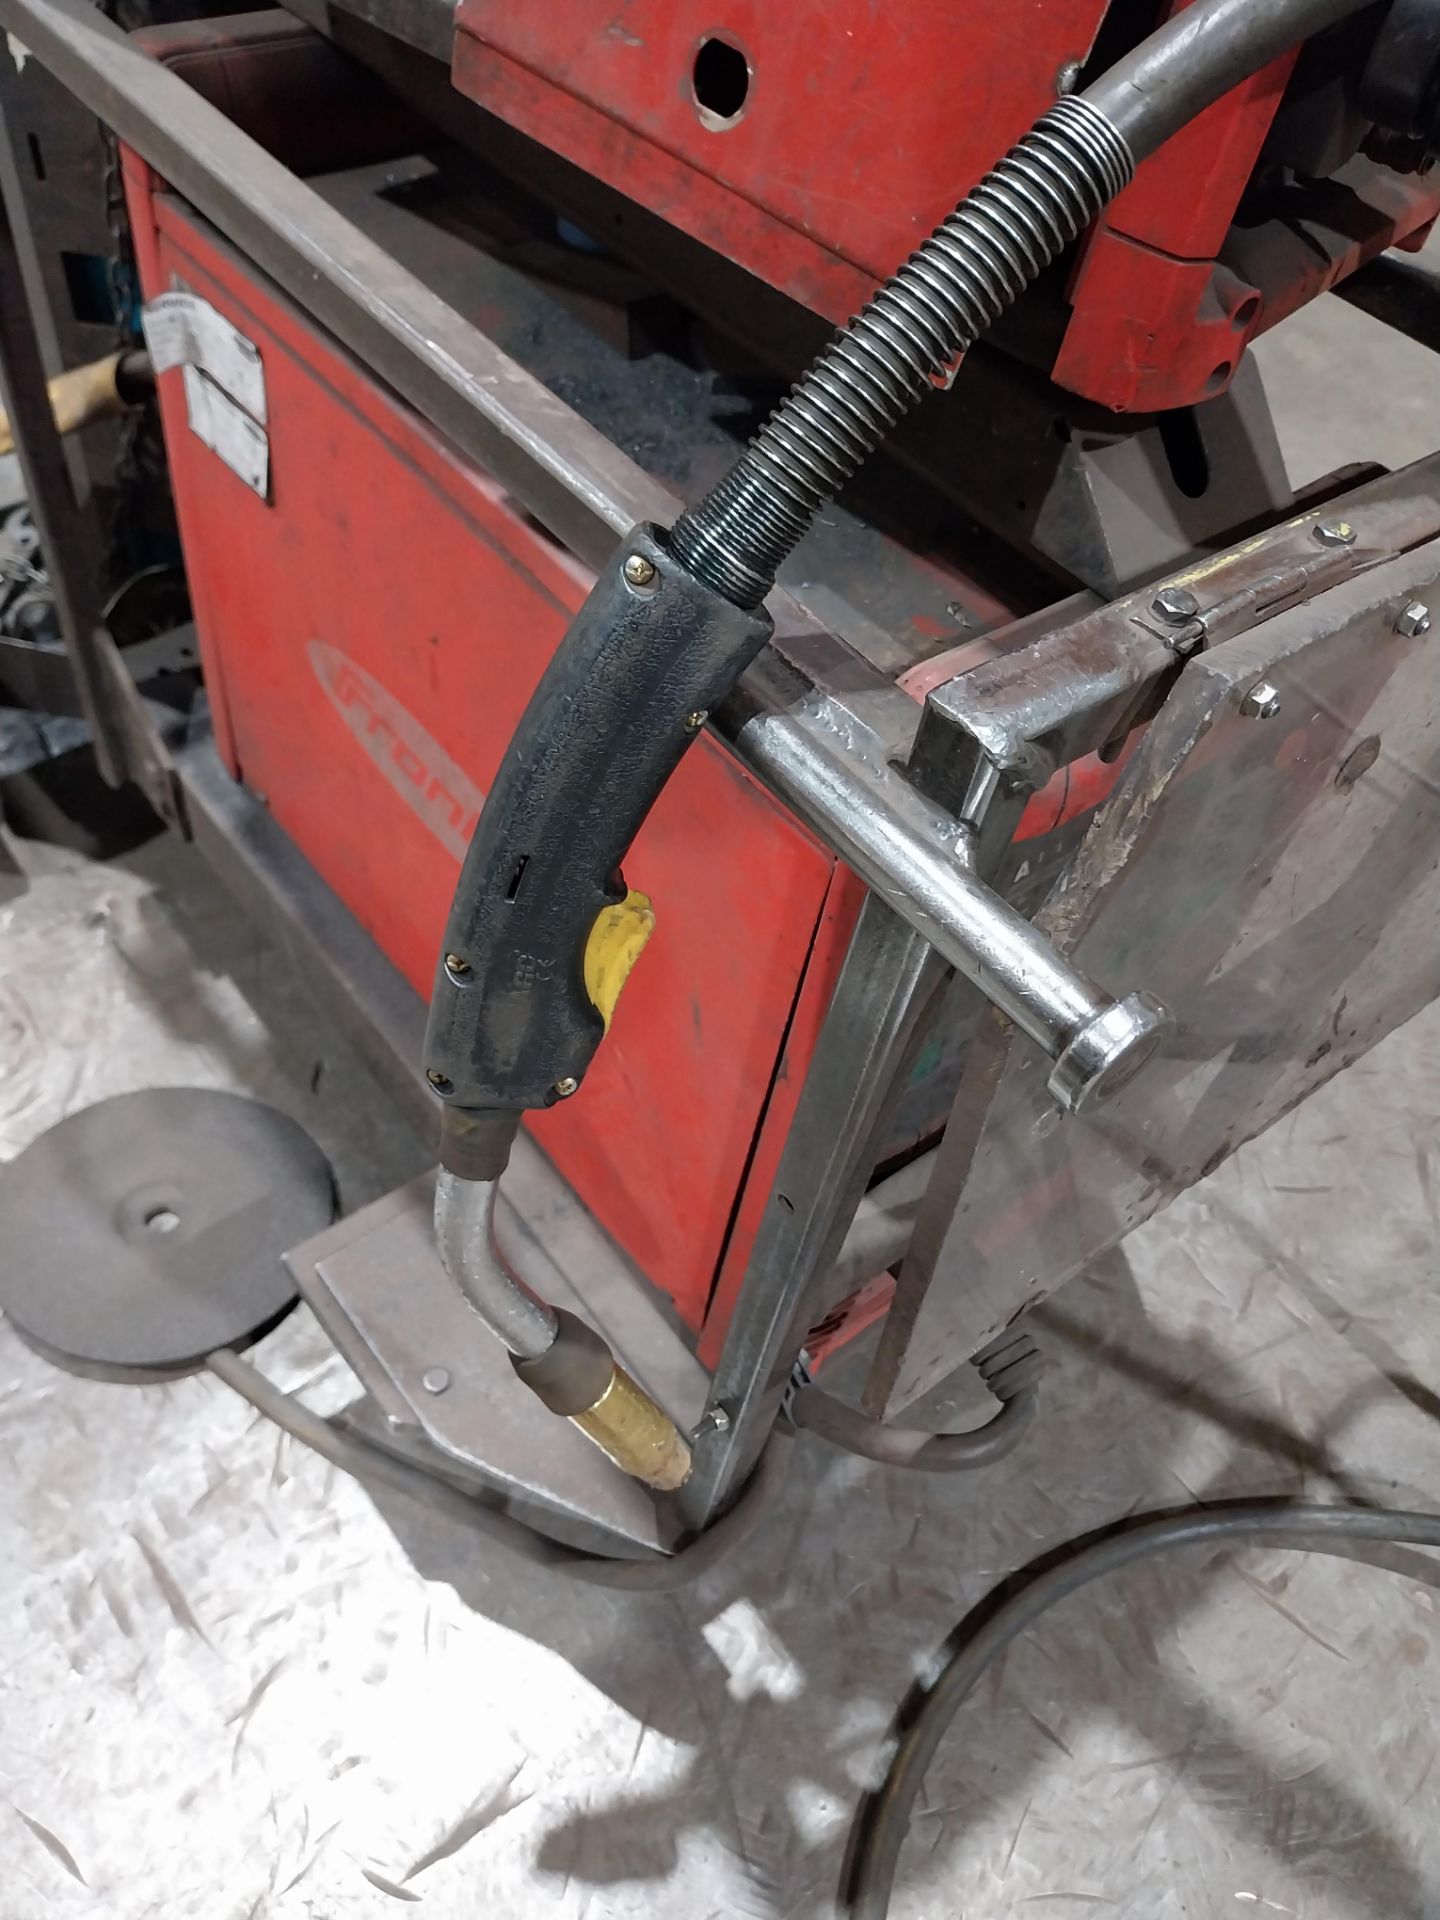 Fronius VR4000 4R/G/W/E mig welder with wire feed (bottle not included) - Image 6 of 7